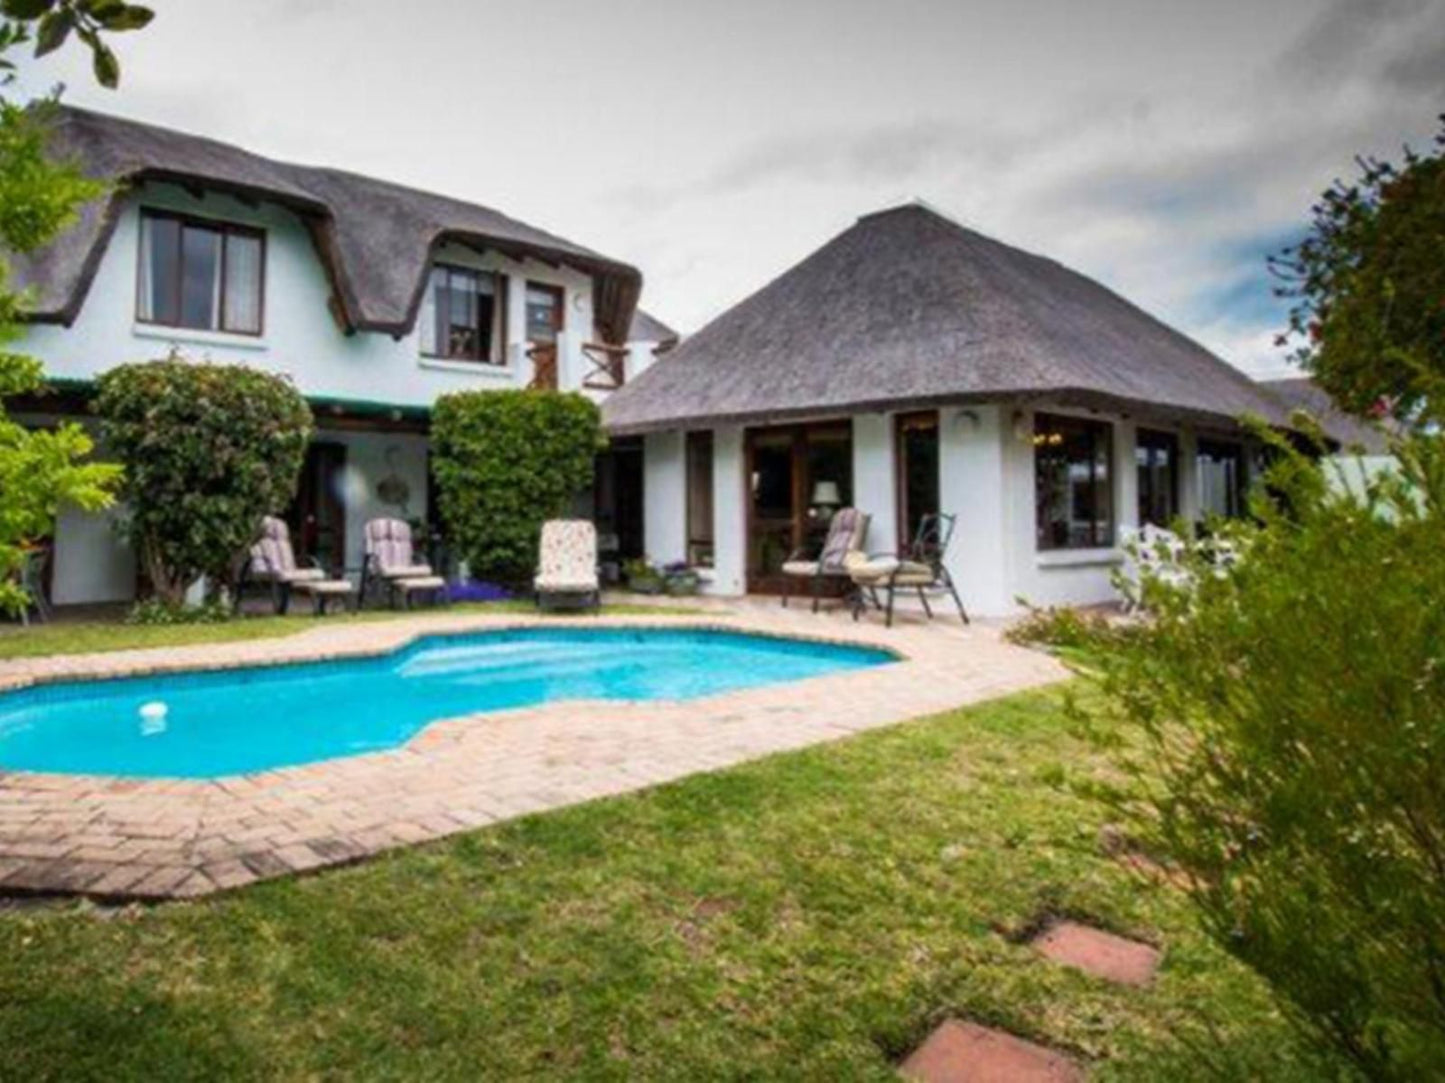 Milkwood Country Cottage St Francis Bay Eastern Cape South Africa House, Building, Architecture, Swimming Pool